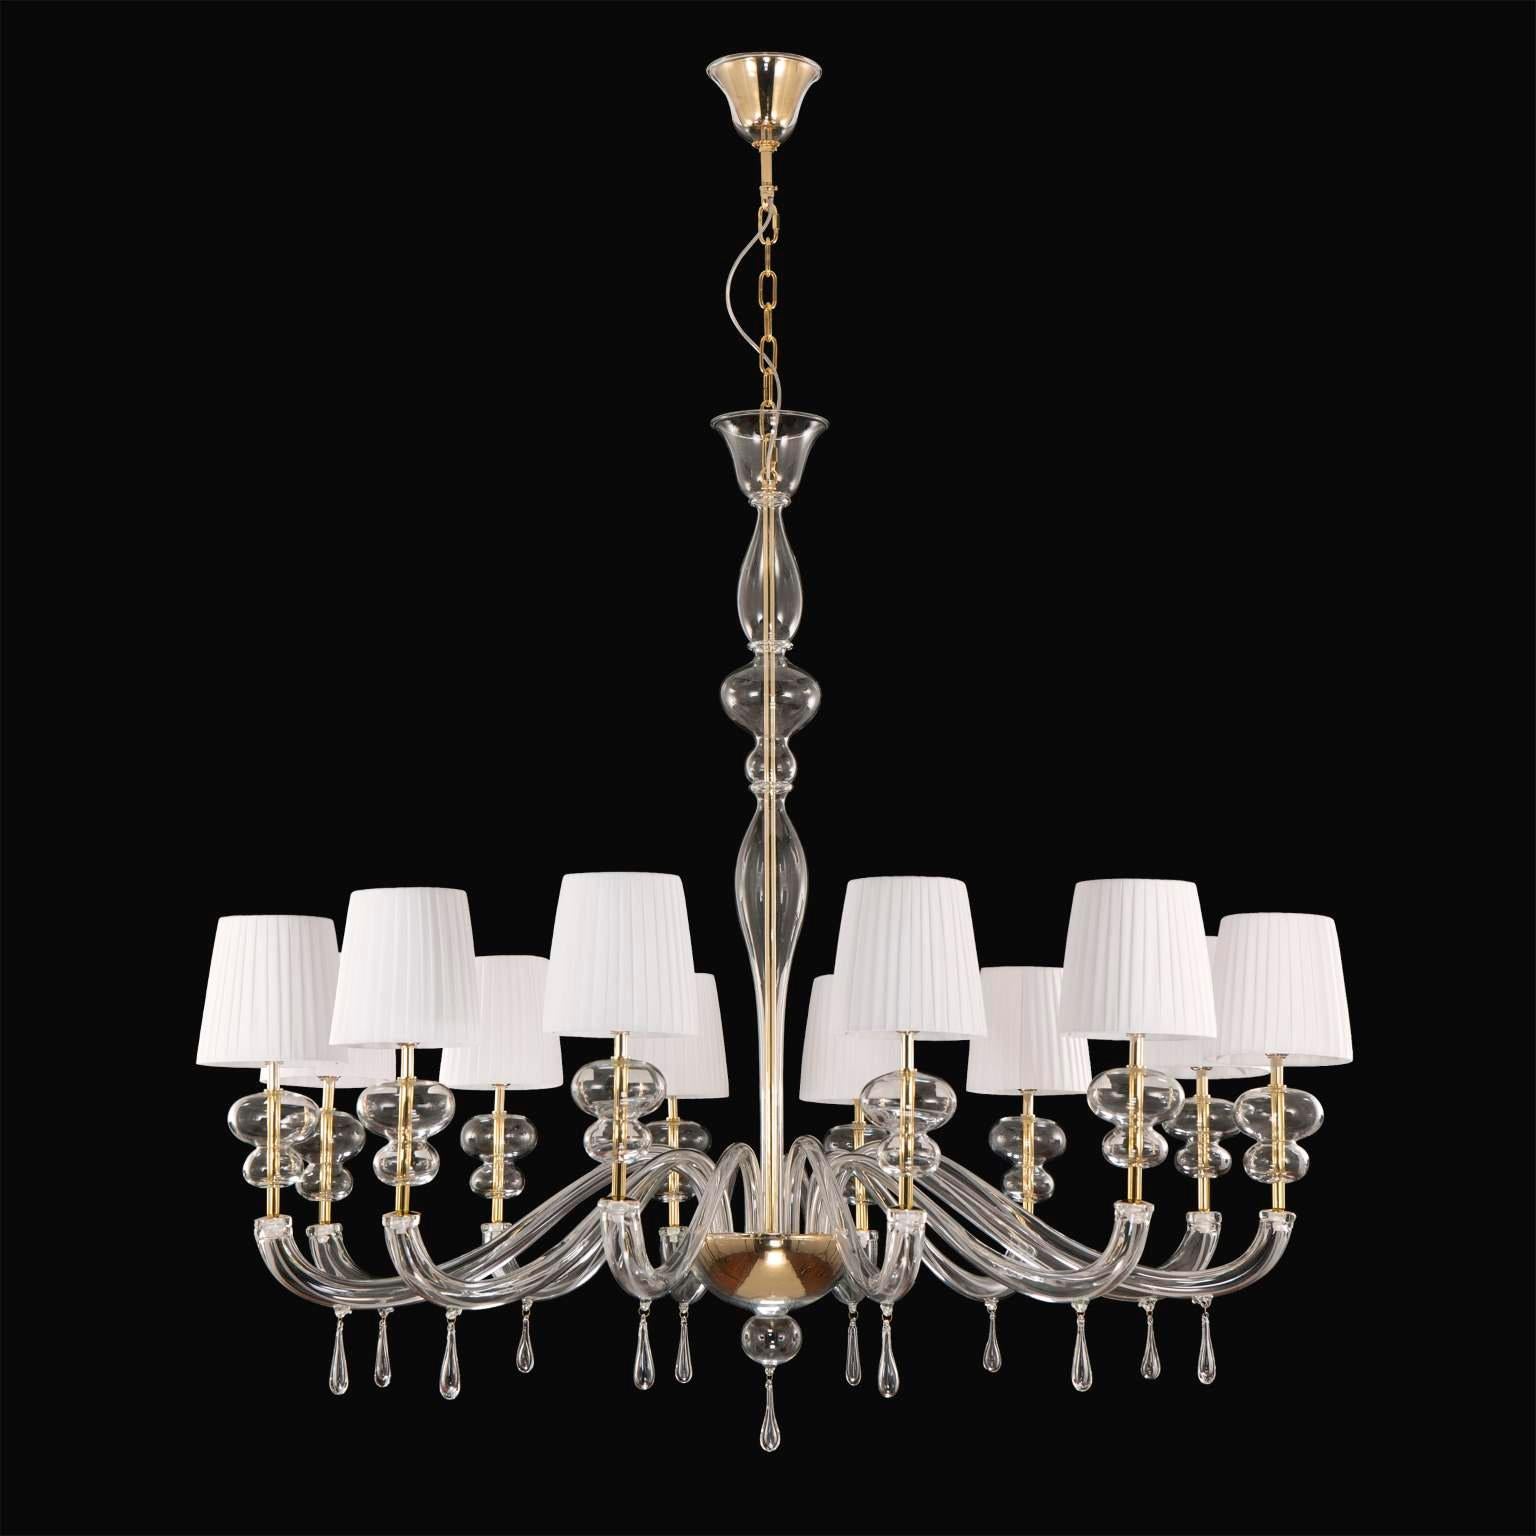 Modern Elegant chandelier 12 lights crystal murano Glass, white lampshades by Multiforme
A collection of chandeliers and wall lights made of Murano glass. The surface of the glass is smooth, the metal details are nickel plated (or gold plated) and